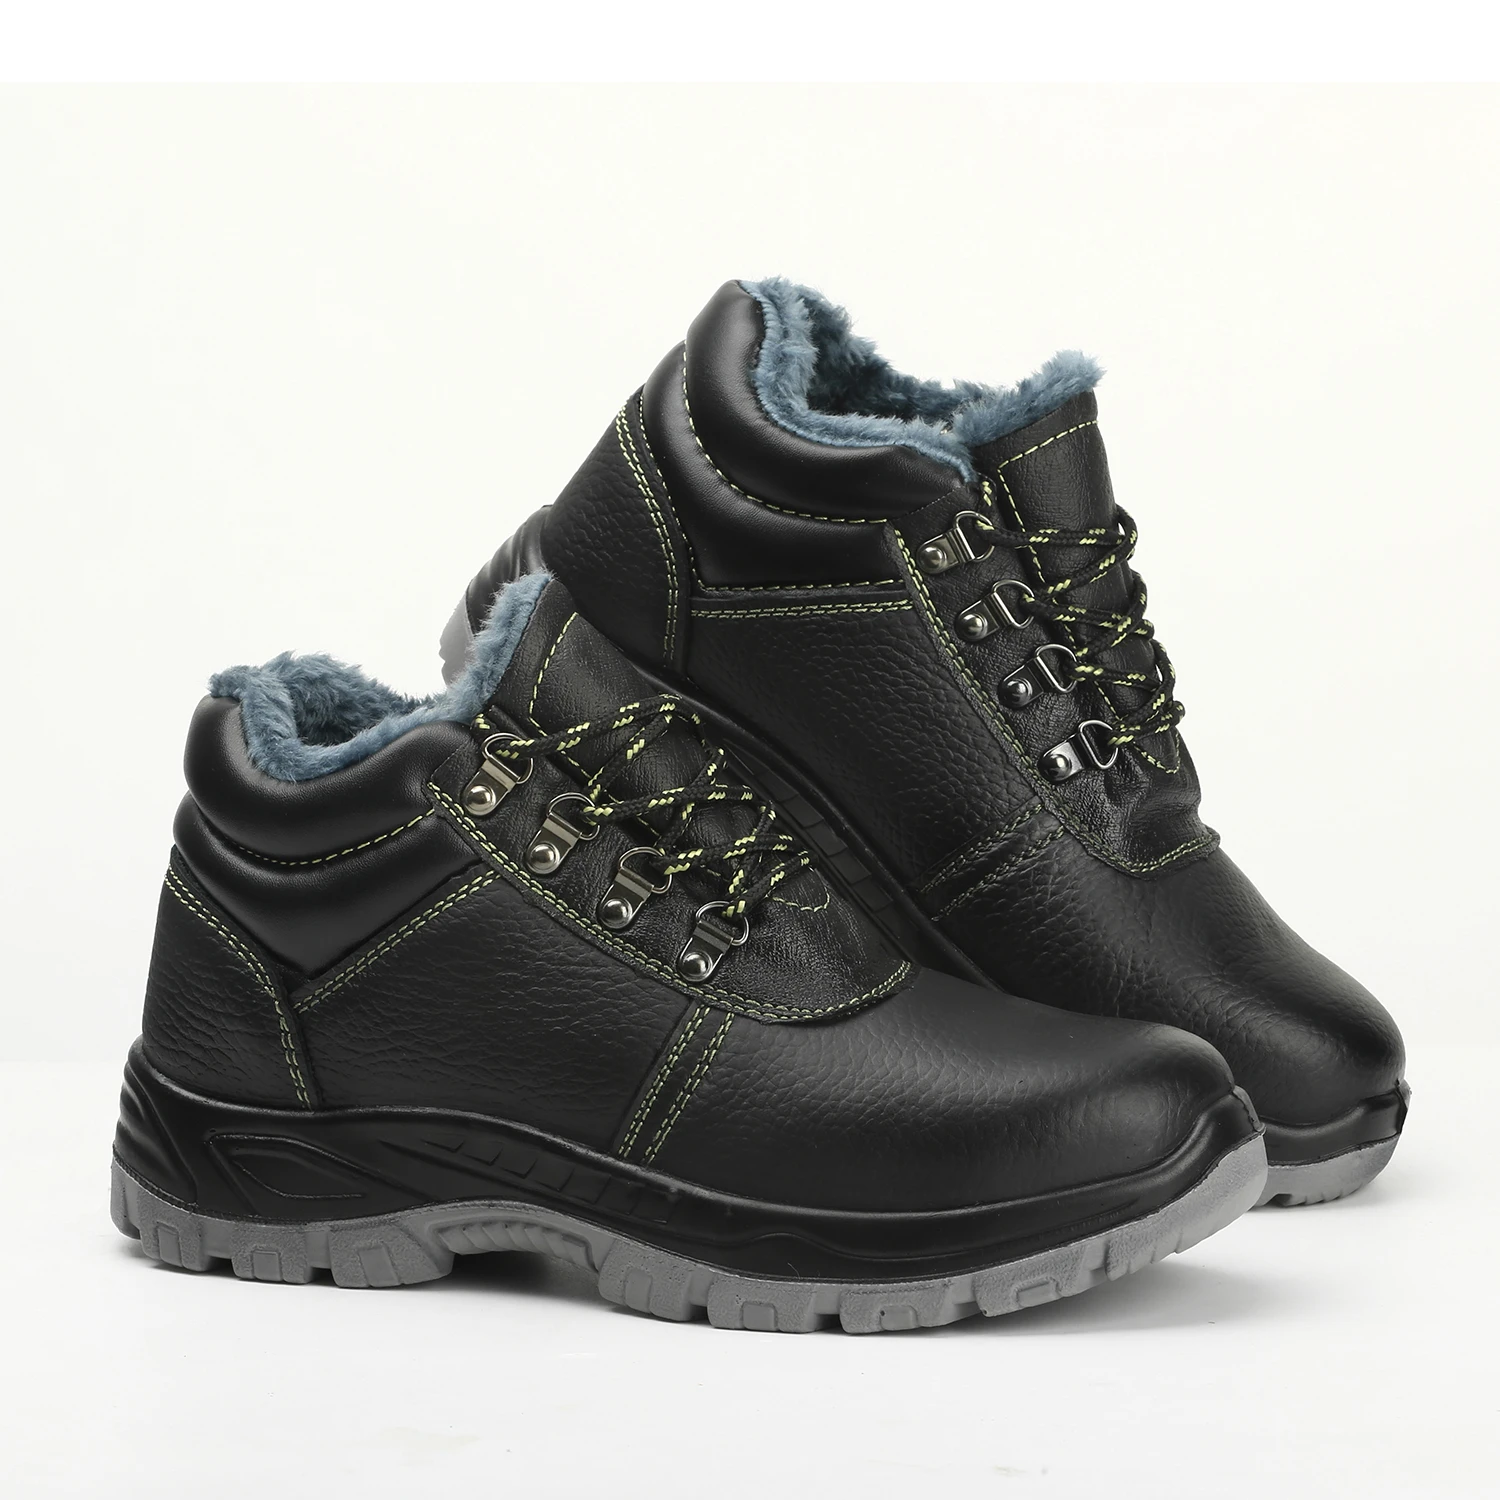 Winter thermal double density polyurethane sole upper leather insulation safety shoes with anti-smash steel toes